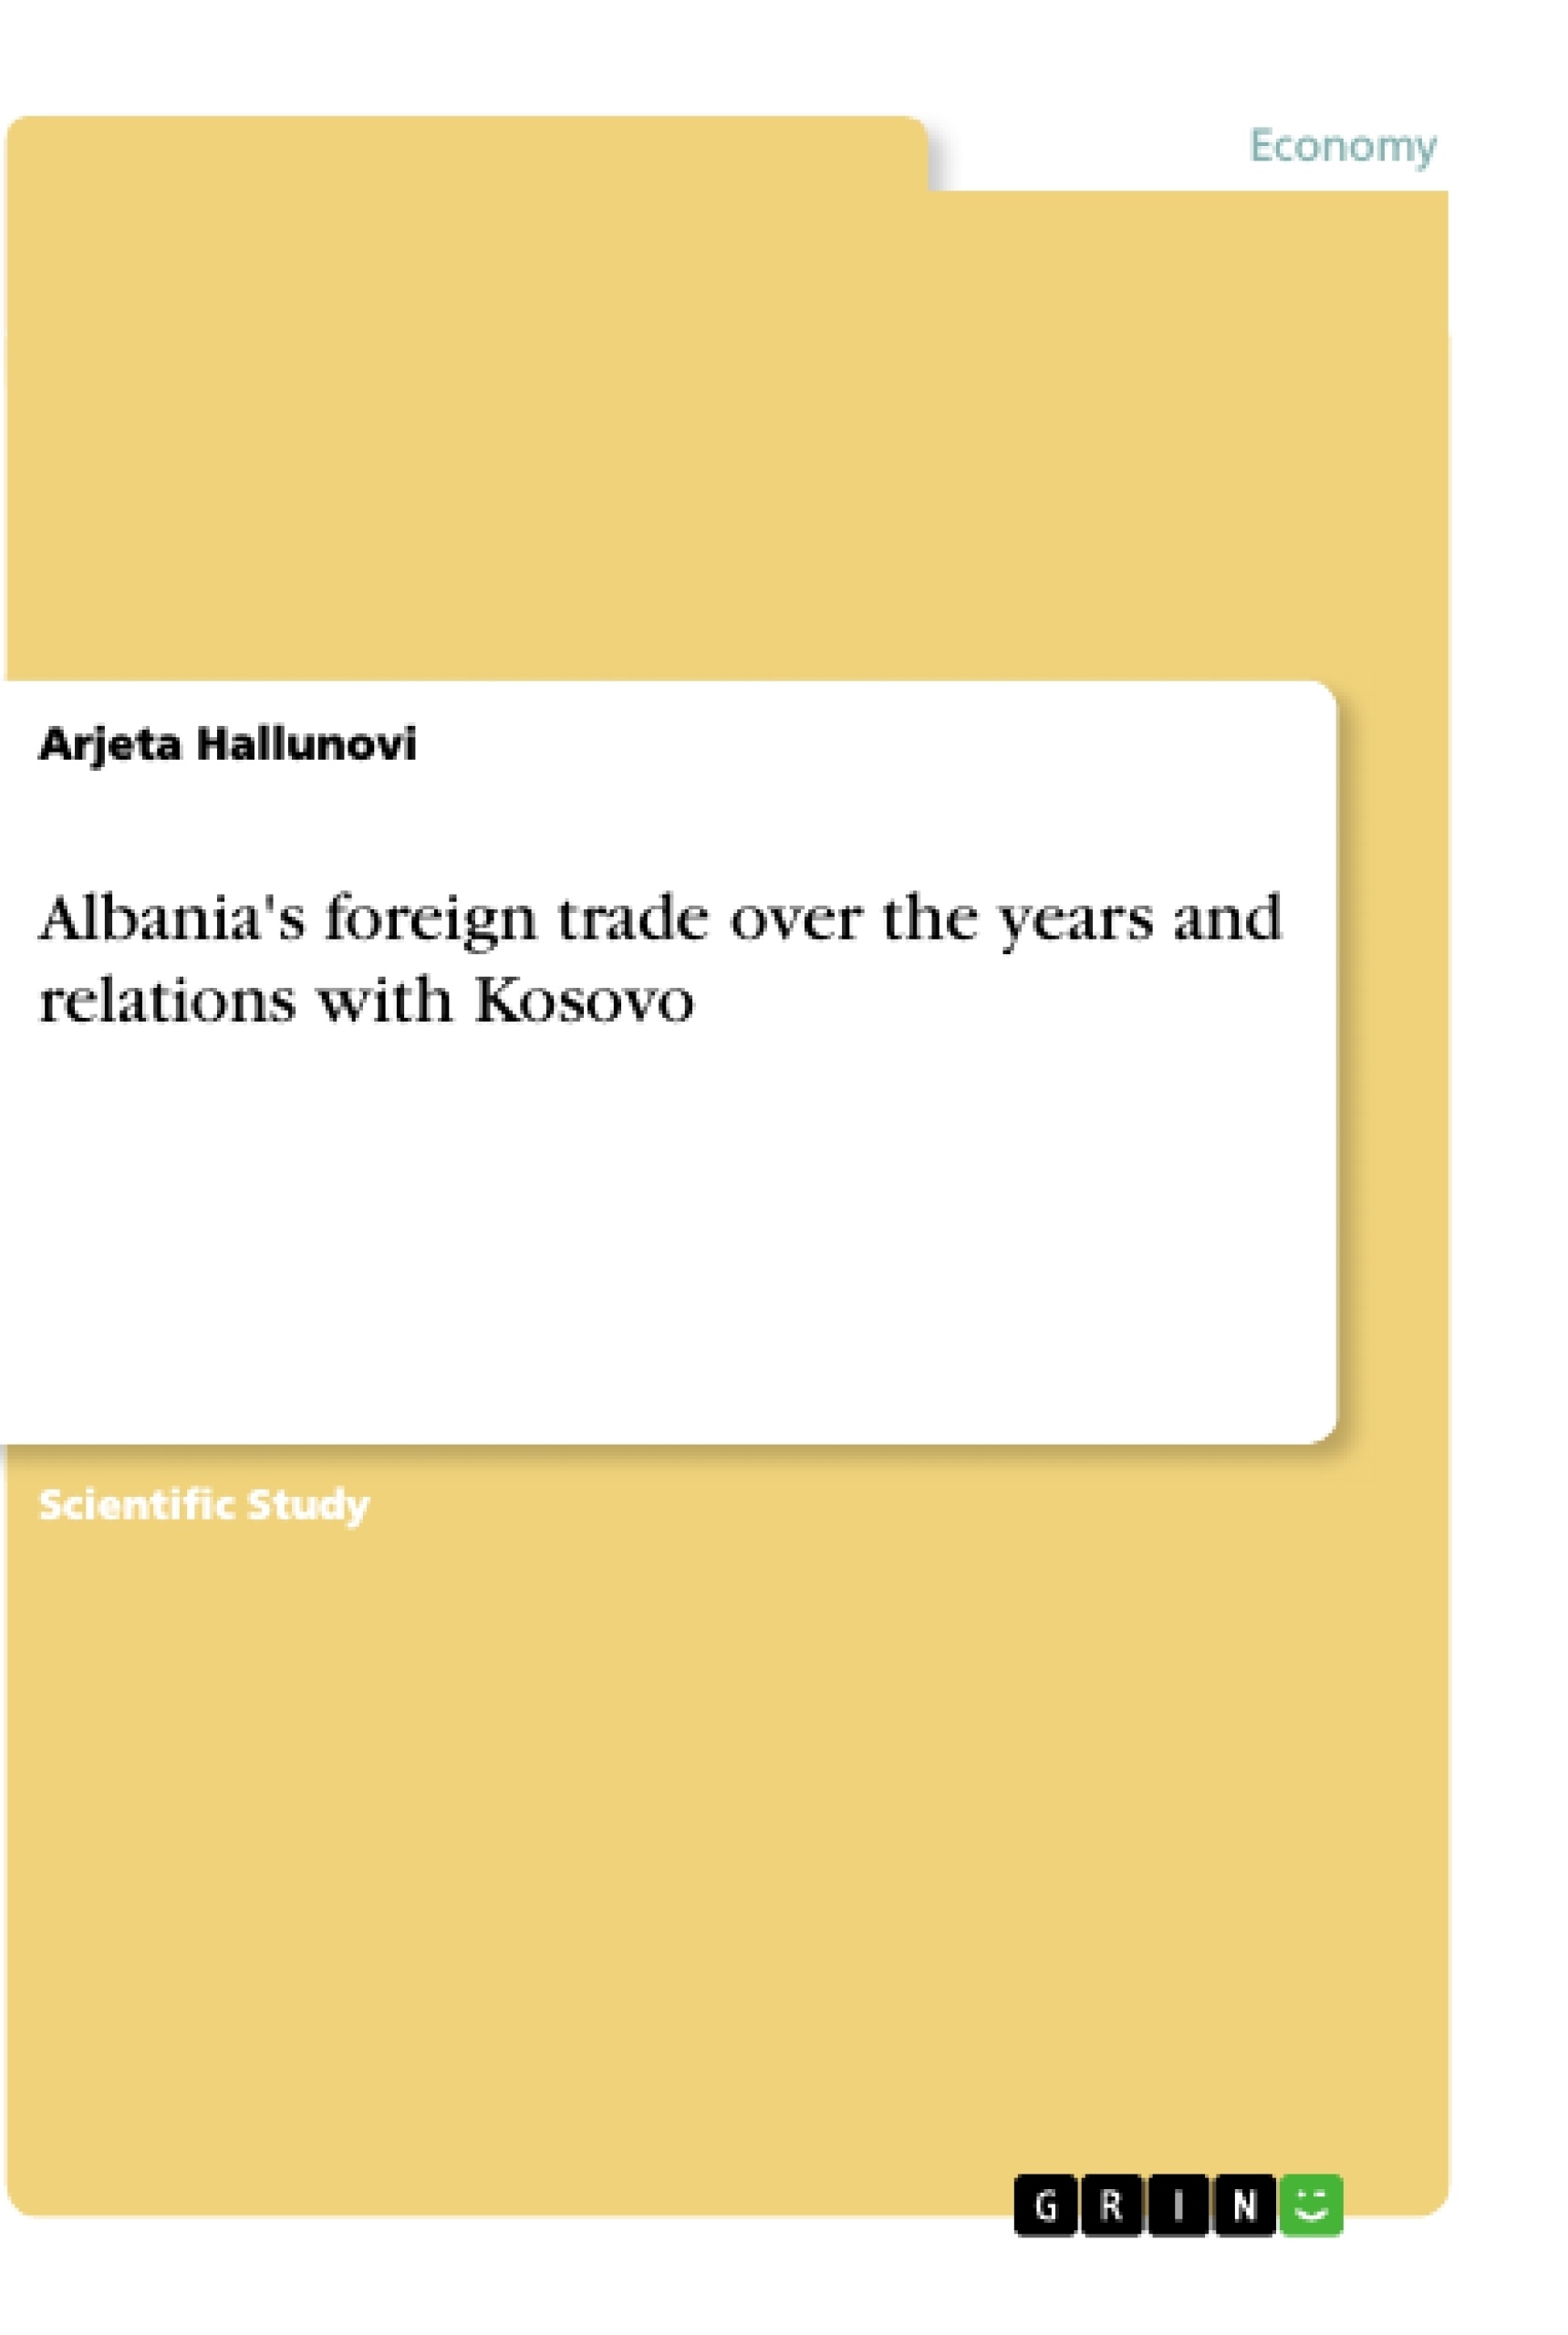 Título: Albania's foreign trade over the years and relations with Kosovo